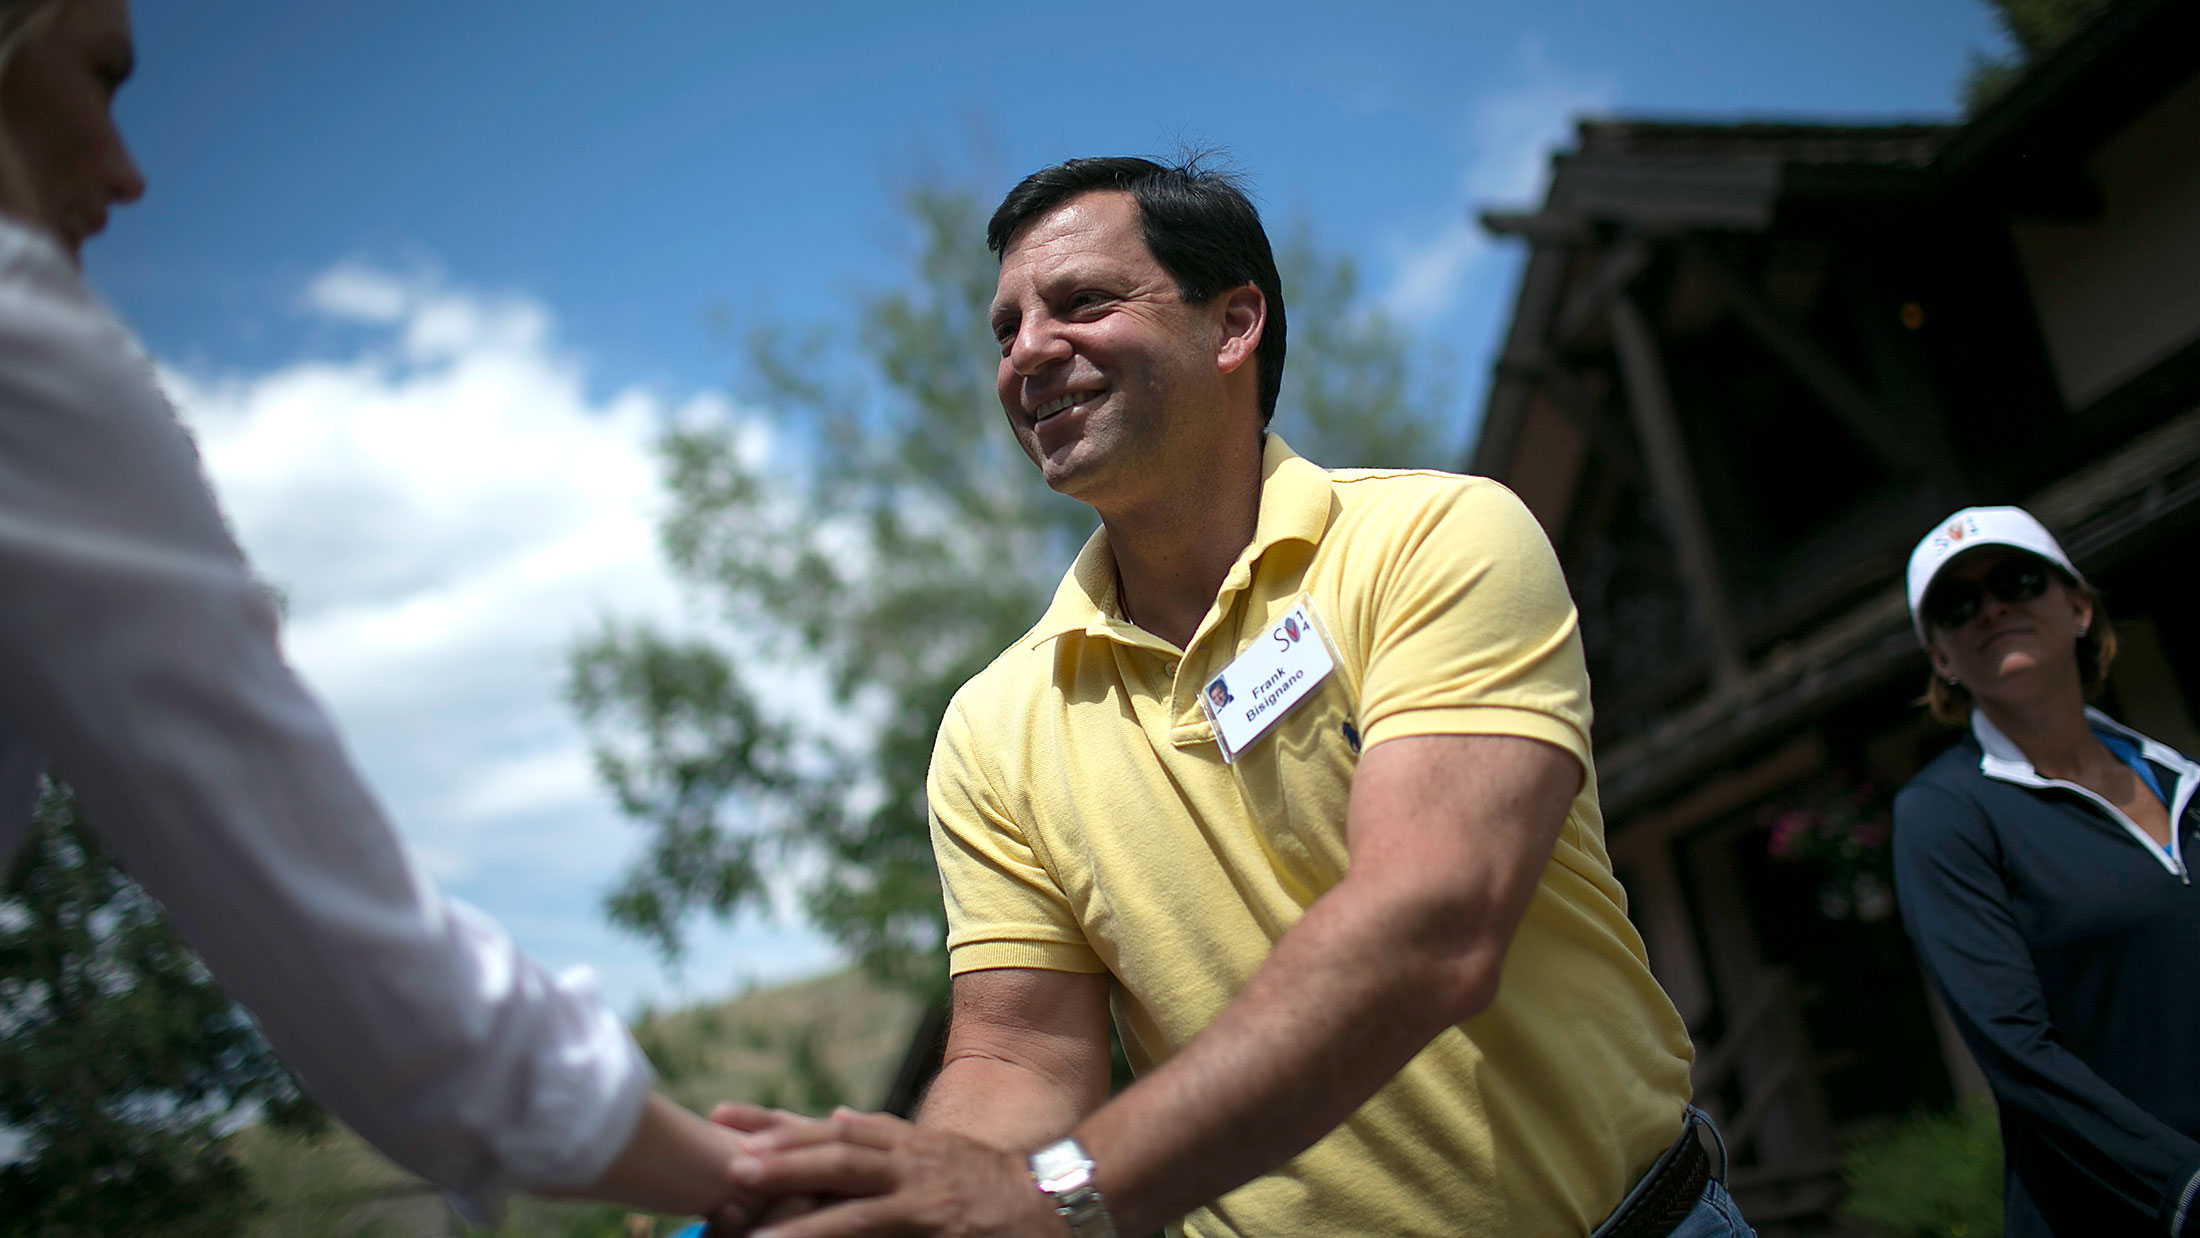 Frank Bisignano, chief executive officer of First Data Corp., shakes a reporter's hand on the grounds during the Allen &amp; Co. Media and Technology Conference in Sun Valley, Idaho, on July 9, 2014.
